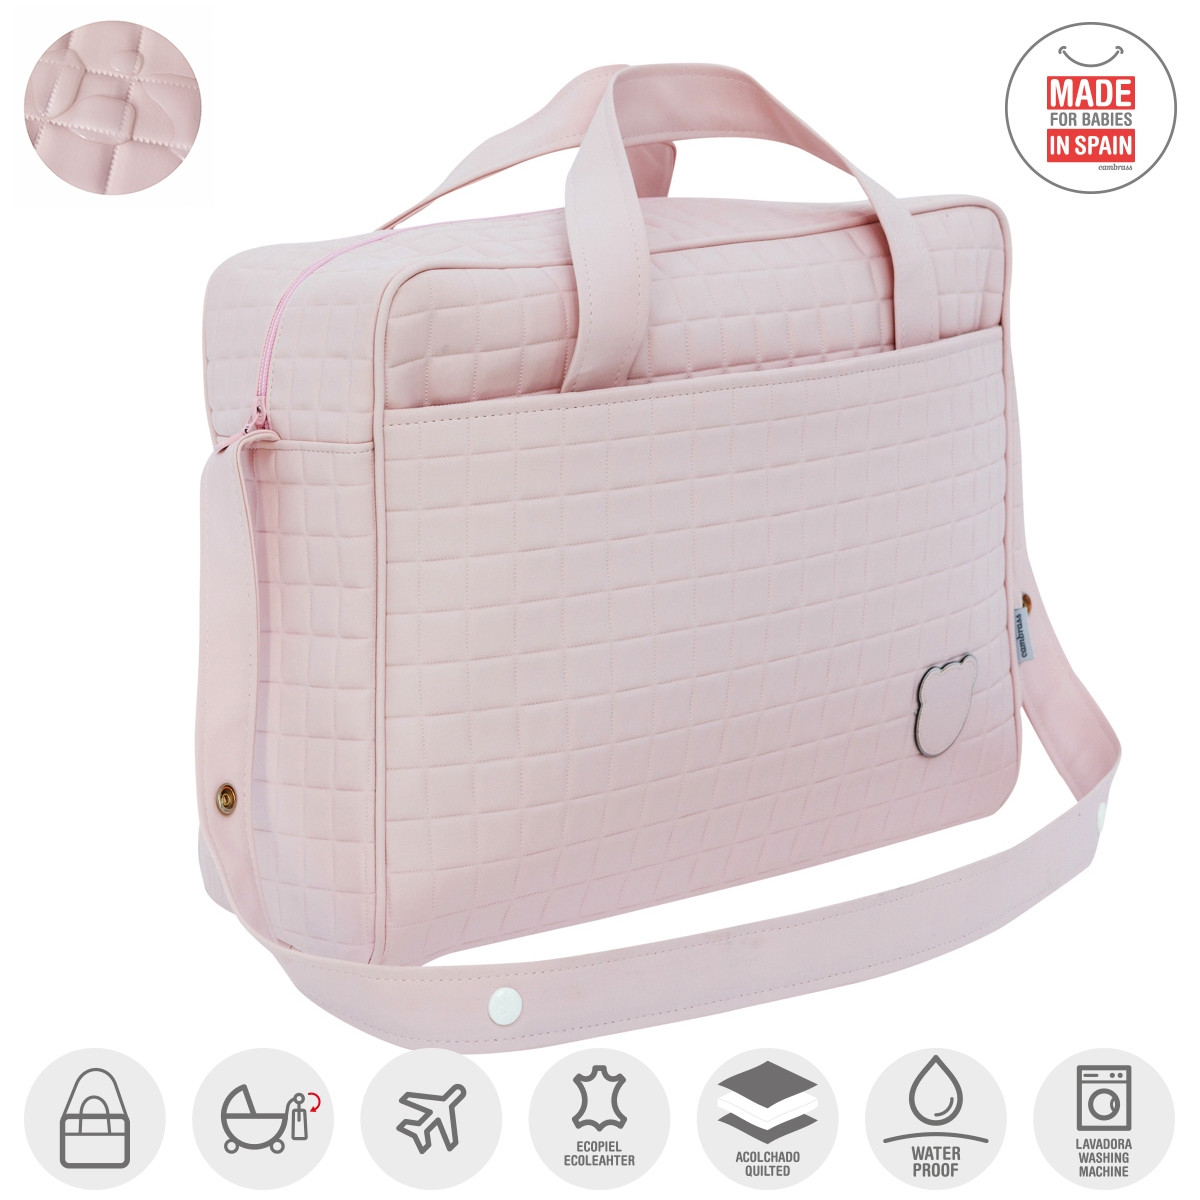 MATERNITY BAG GOFRE PINK 20x44x33 CM CAMBRASS - 6